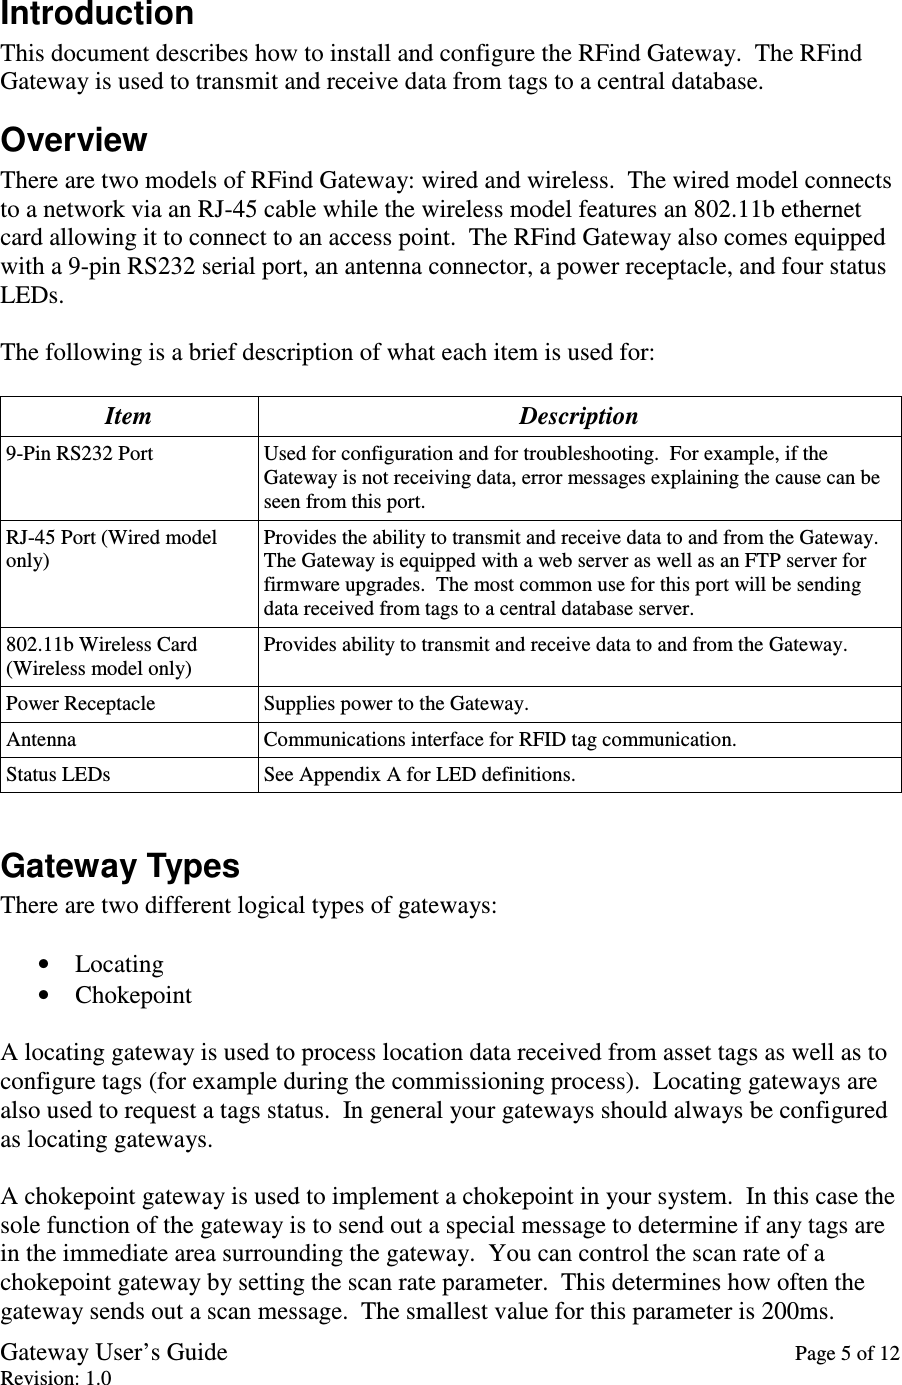 Gateway User’s Guide    Page 5 of 12 Revision: 1.0  Introduction This document describes how to install and configure the RFind Gateway.  The RFind Gateway is used to transmit and receive data from tags to a central database. Overview There are two models of RFind Gateway: wired and wireless.  The wired model connects to a network via an RJ-45 cable while the wireless model features an 802.11b ethernet card allowing it to connect to an access point.  The RFind Gateway also comes equipped with a 9-pin RS232 serial port, an antenna connector, a power receptacle, and four status LEDs.  The following is a brief description of what each item is used for:  Item  Description 9-Pin RS232 Port  Used for configuration and for troubleshooting.  For example, if the Gateway is not receiving data, error messages explaining the cause can be seen from this port. RJ-45 Port (Wired model only) Provides the ability to transmit and receive data to and from the Gateway.  The Gateway is equipped with a web server as well as an FTP server for firmware upgrades.  The most common use for this port will be sending data received from tags to a central database server. 802.11b Wireless Card (Wireless model only) Provides ability to transmit and receive data to and from the Gateway. Power Receptacle  Supplies power to the Gateway. Antenna  Communications interface for RFID tag communication. Status LEDs  See Appendix A for LED definitions.  Gateway Types There are two different logical types of gateways:  • Locating • Chokepoint  A locating gateway is used to process location data received from asset tags as well as to configure tags (for example during the commissioning process).  Locating gateways are also used to request a tags status.  In general your gateways should always be configured as locating gateways.  A chokepoint gateway is used to implement a chokepoint in your system.  In this case the sole function of the gateway is to send out a special message to determine if any tags are in the immediate area surrounding the gateway.  You can control the scan rate of a chokepoint gateway by setting the scan rate parameter.  This determines how often the gateway sends out a scan message.  The smallest value for this parameter is 200ms. 